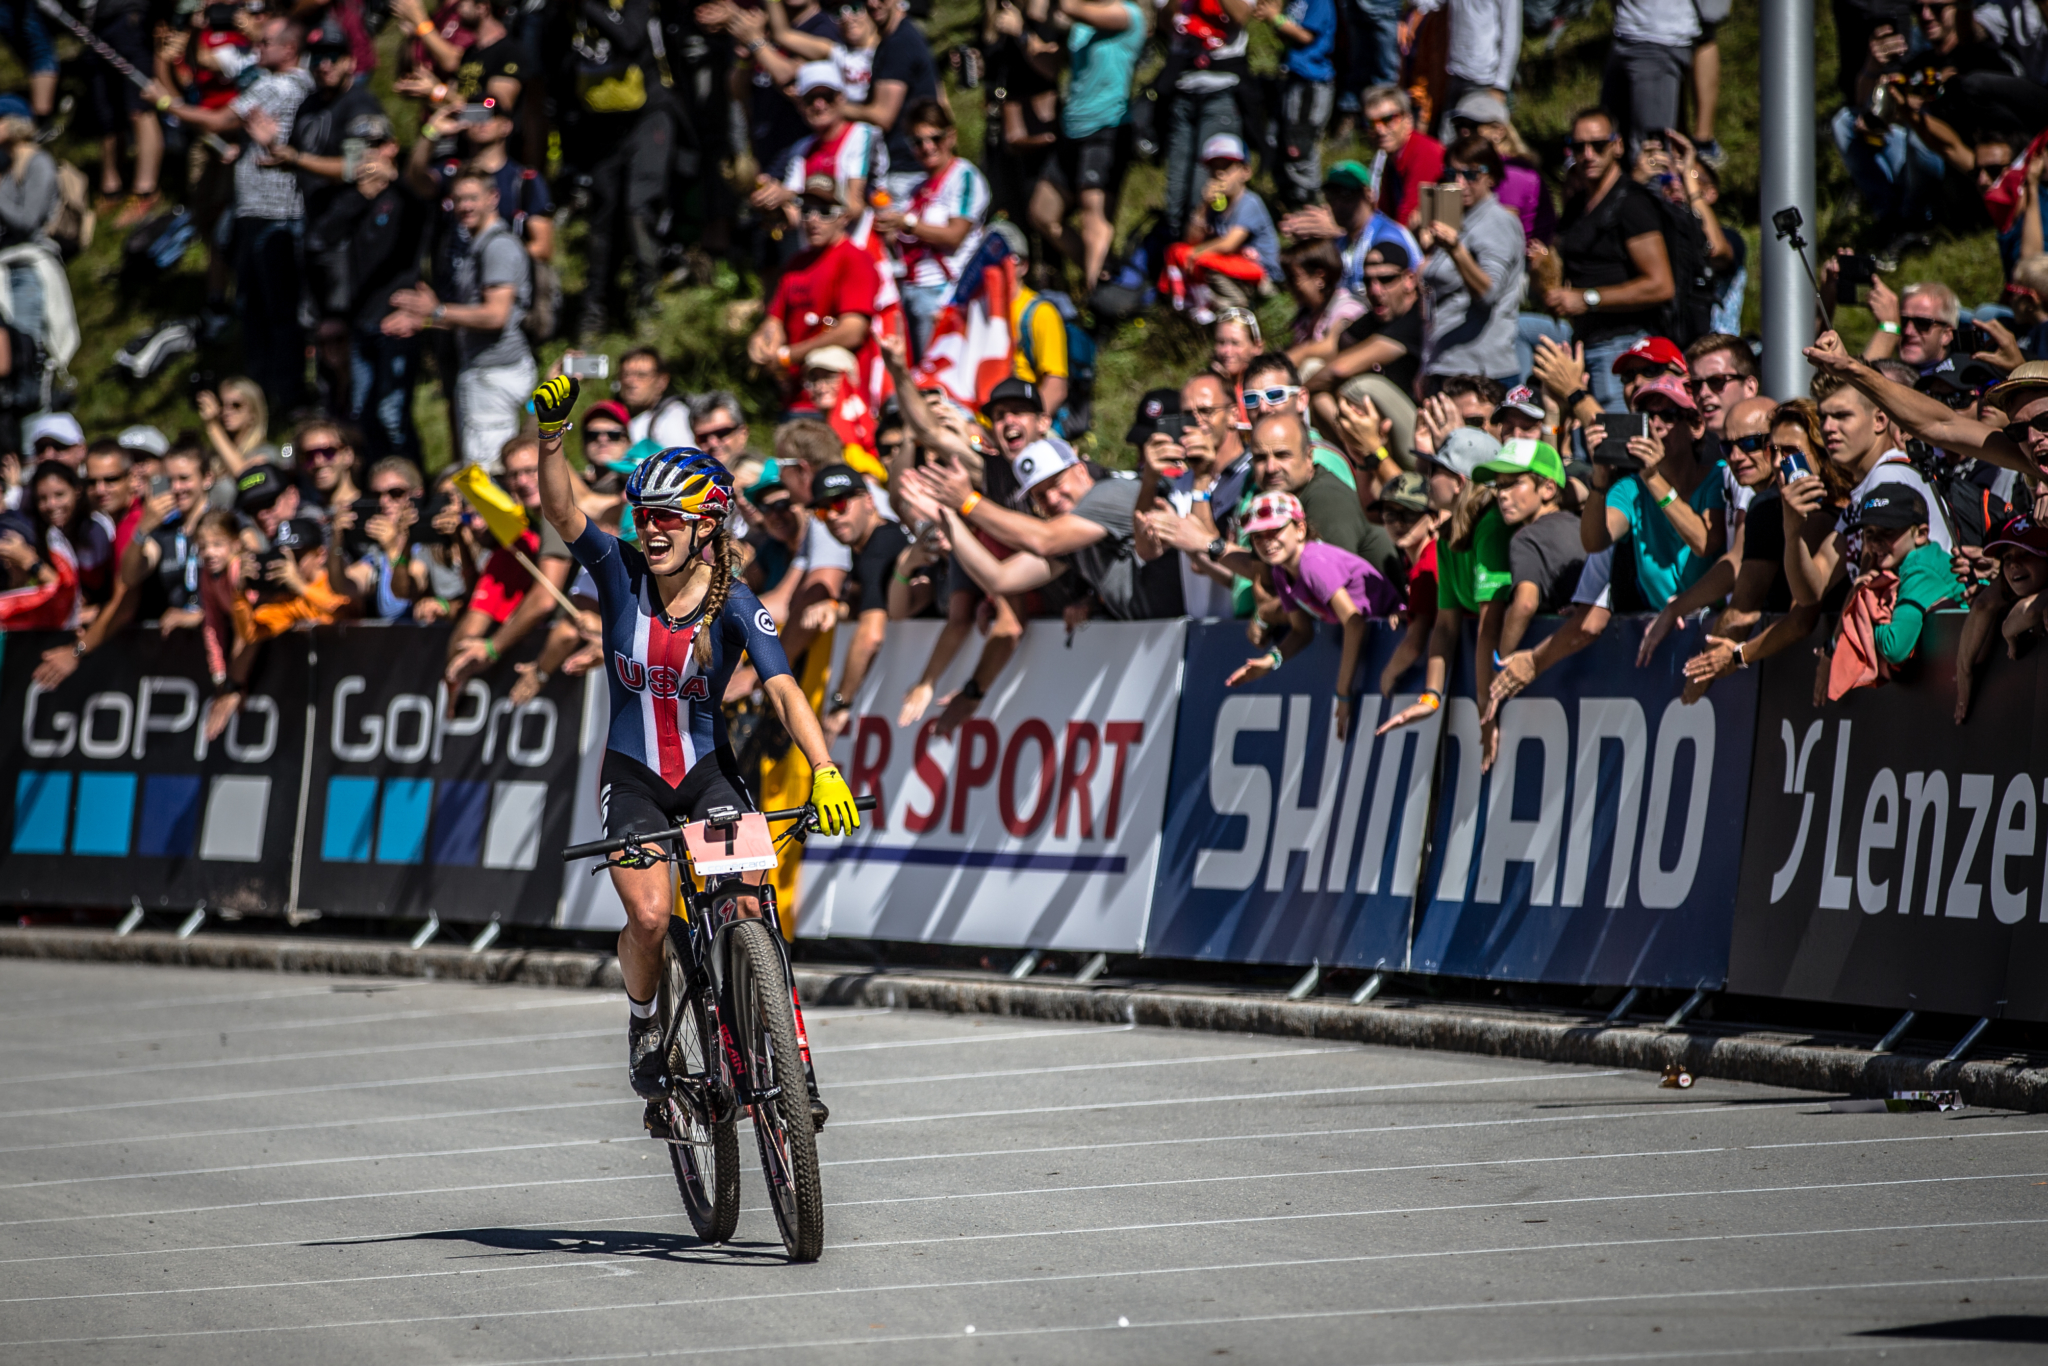 Kate Courtney (USA) wins the Women Elite Cross Country event at the 2018 UCI MTB World Championships - Lenzerheide, Switzerland